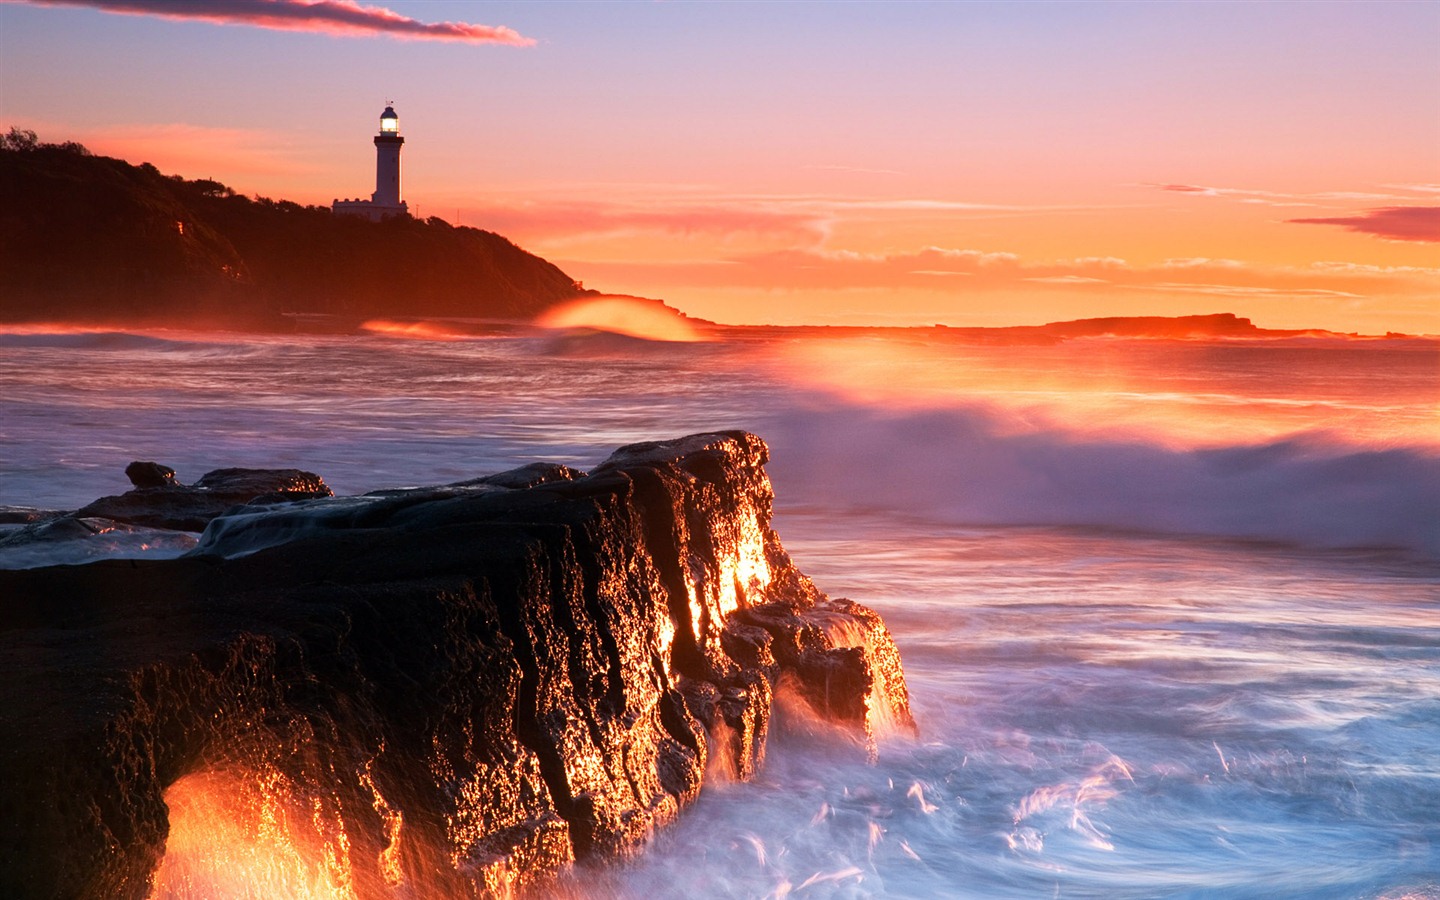 Windows 7 Wallpapers: Lighthouses #1 - 1440x900